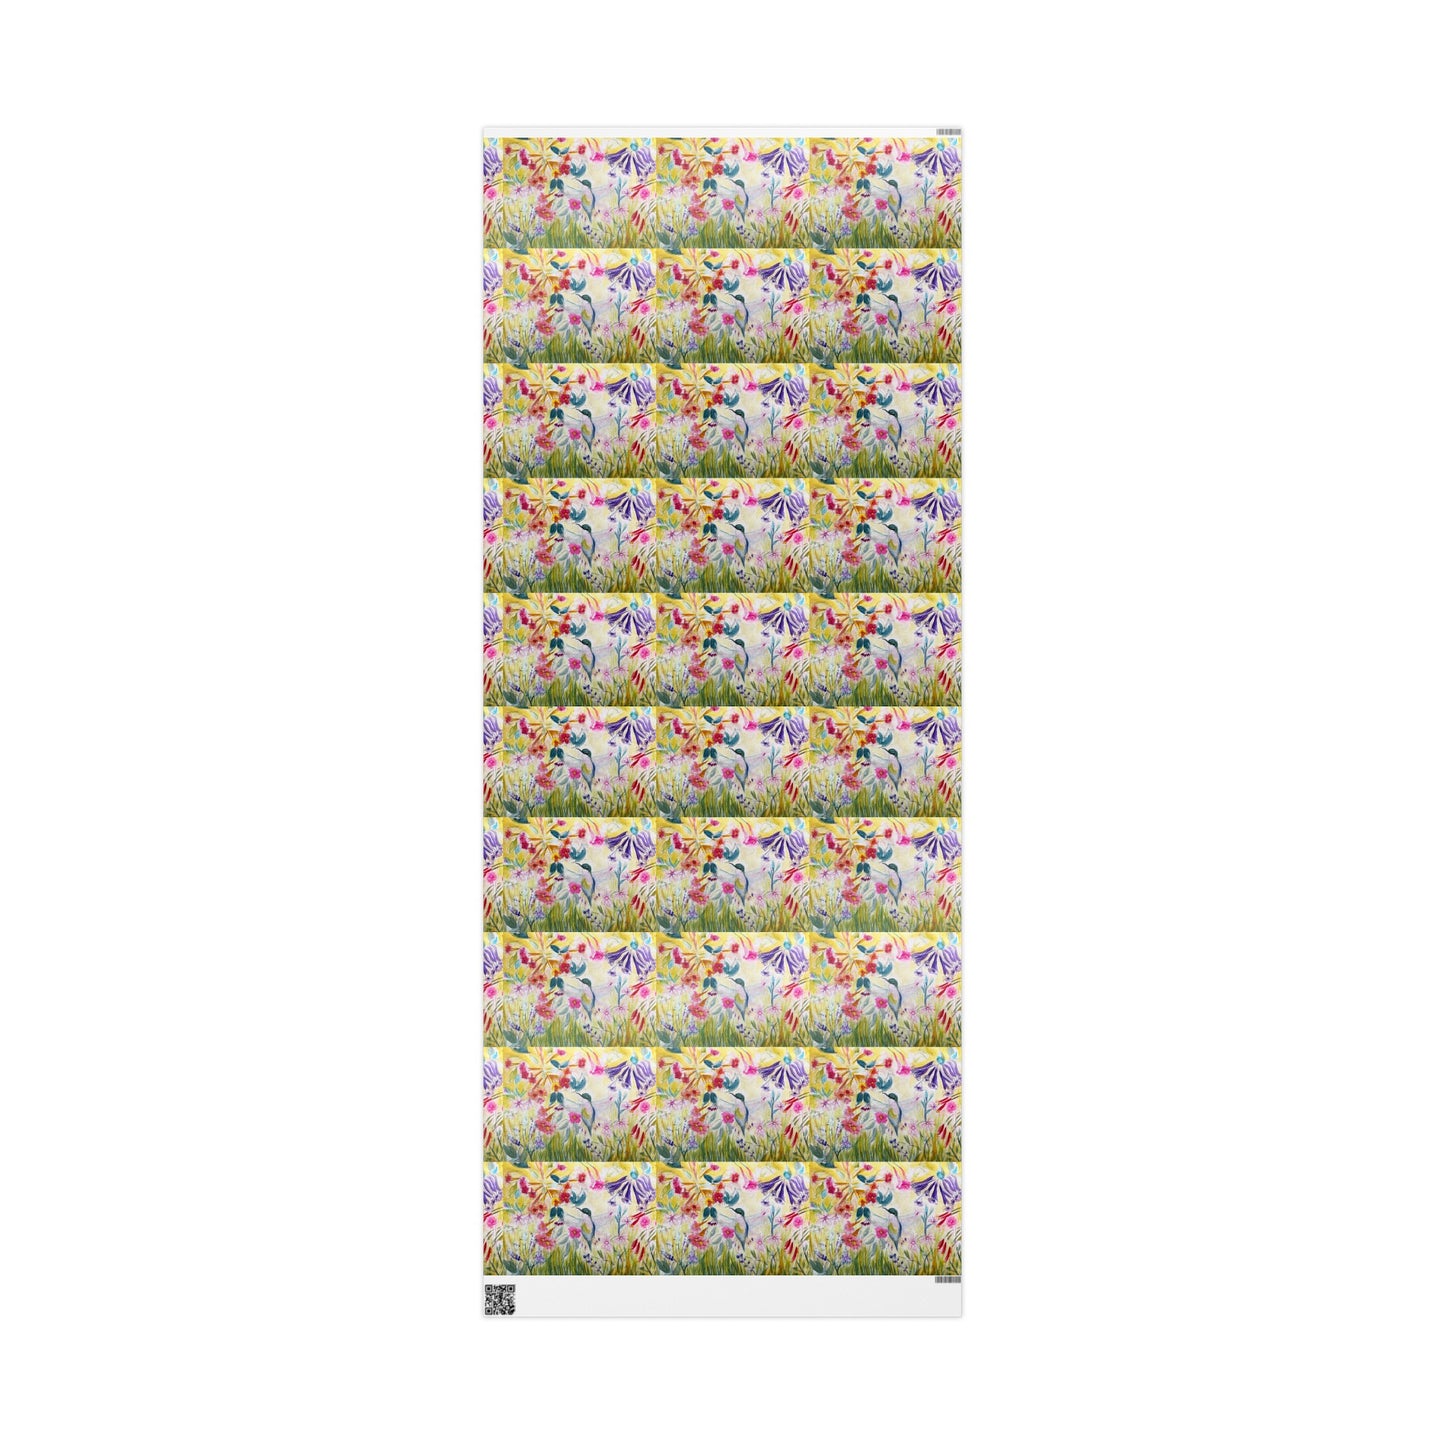 Hummingbird in a Tube Flower Garden (3 Sizes) Wrapping Papers